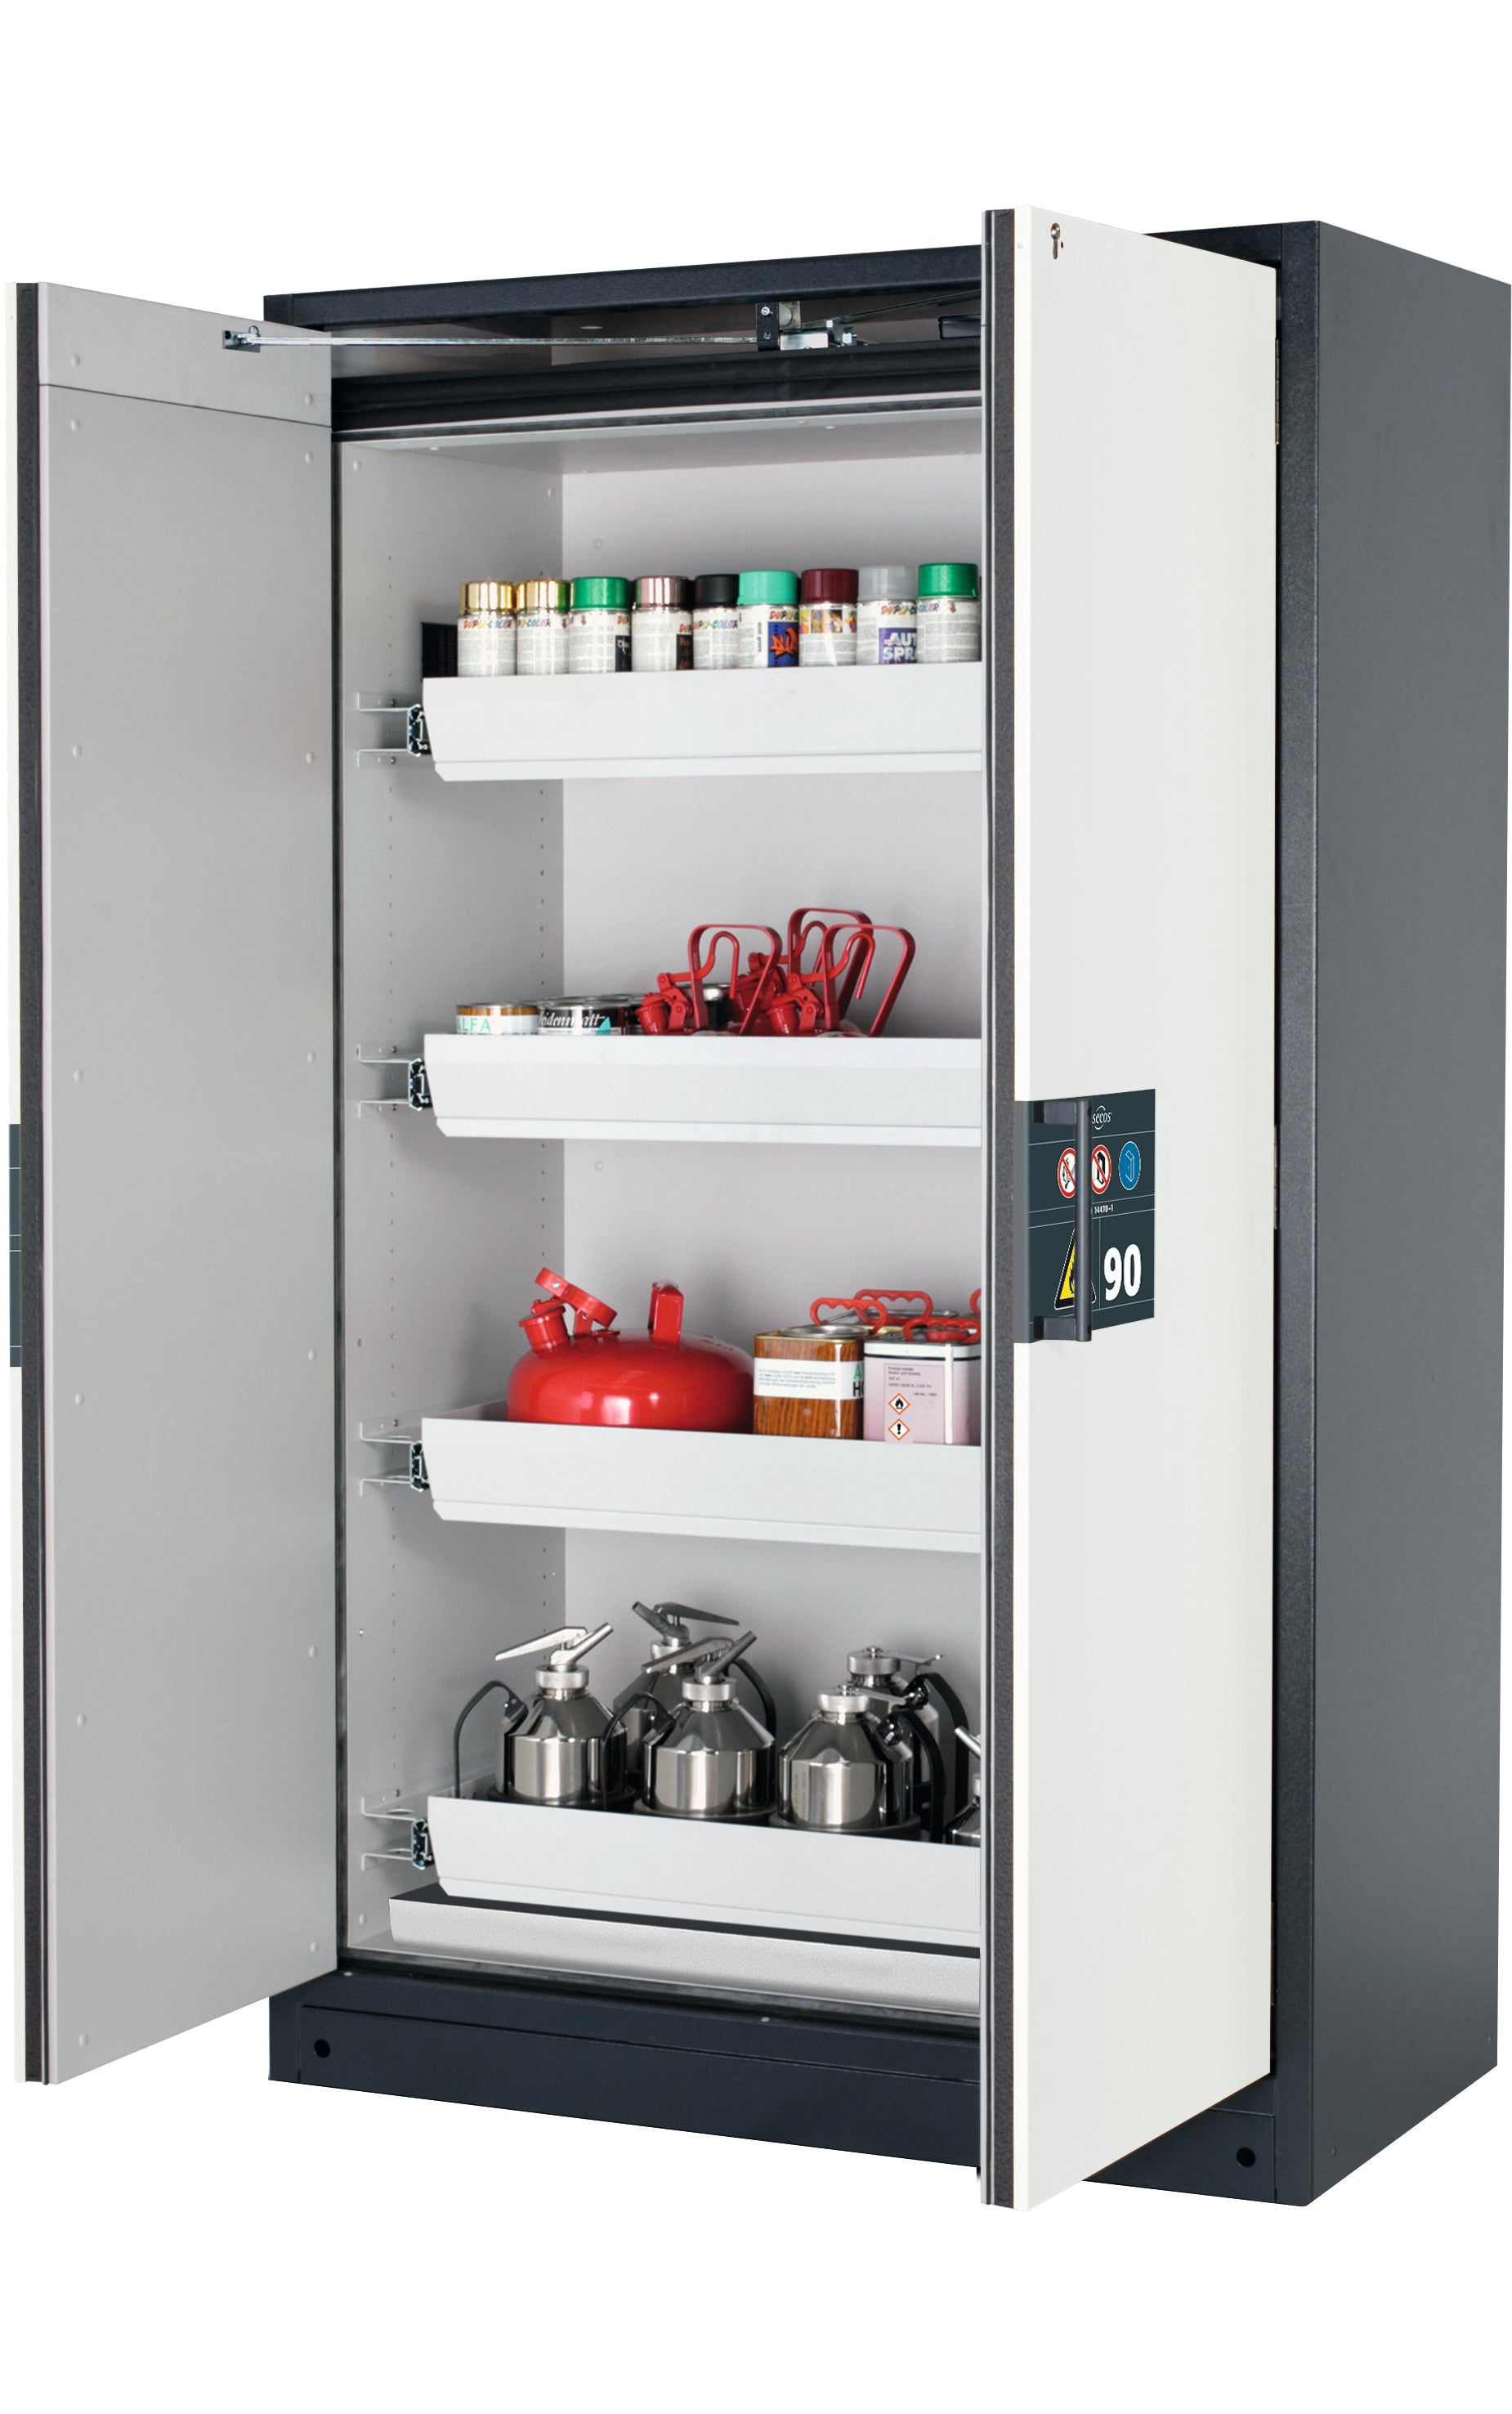 Type 90 safety storage cabinet Q-PEGASUS-90 model Q90.195.120.WDAC in pure white RAL 9010 with 4x drawer (standard) (sheet steel),